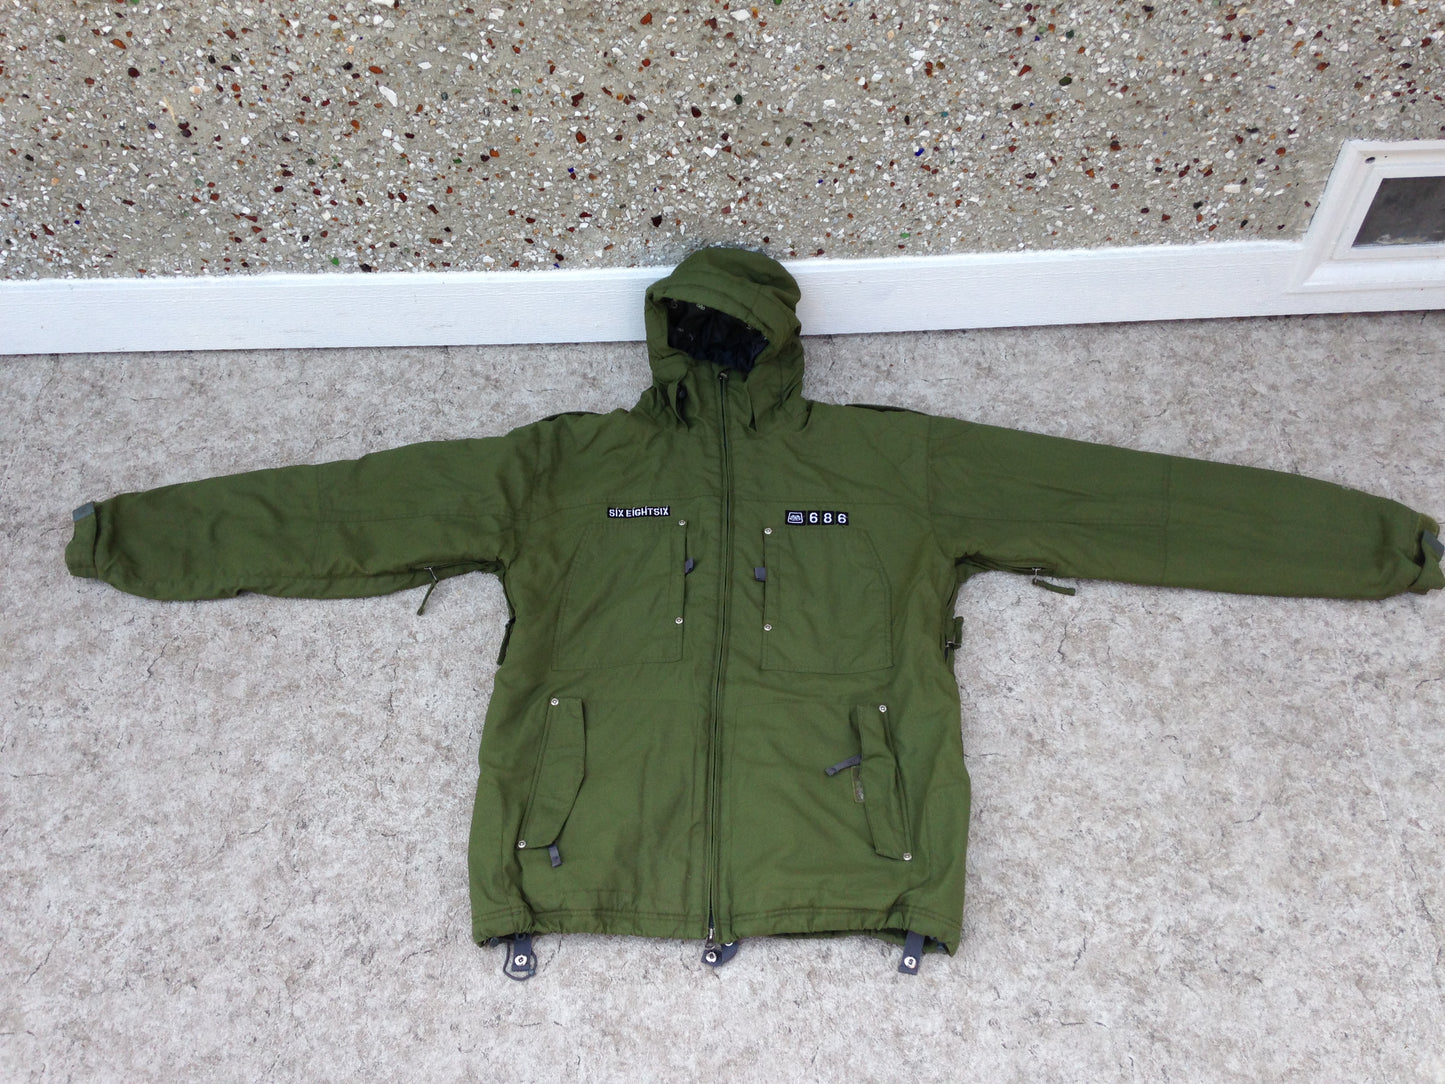 Winter Coat Men's Size X Large 686 Snowboarding With Snow Belt Hunter Green Minor Wear Outstanding Quality